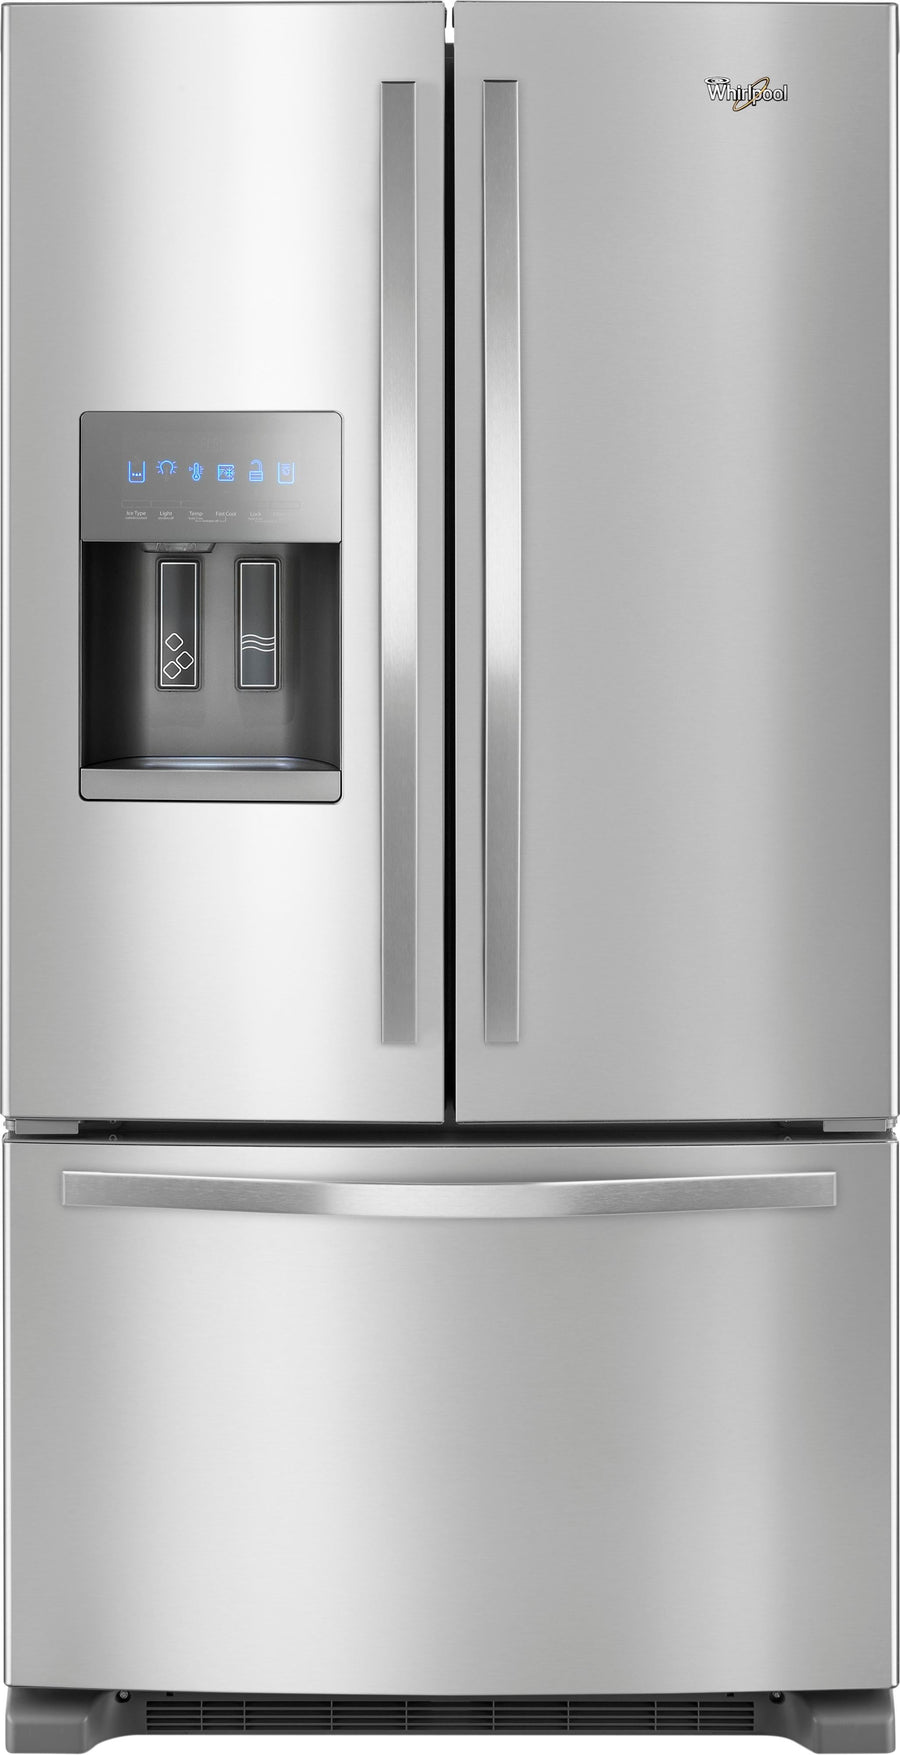 Whirlpool - 24.7 Cu. Ft. French Door Refrigerator - Stainless steel_0